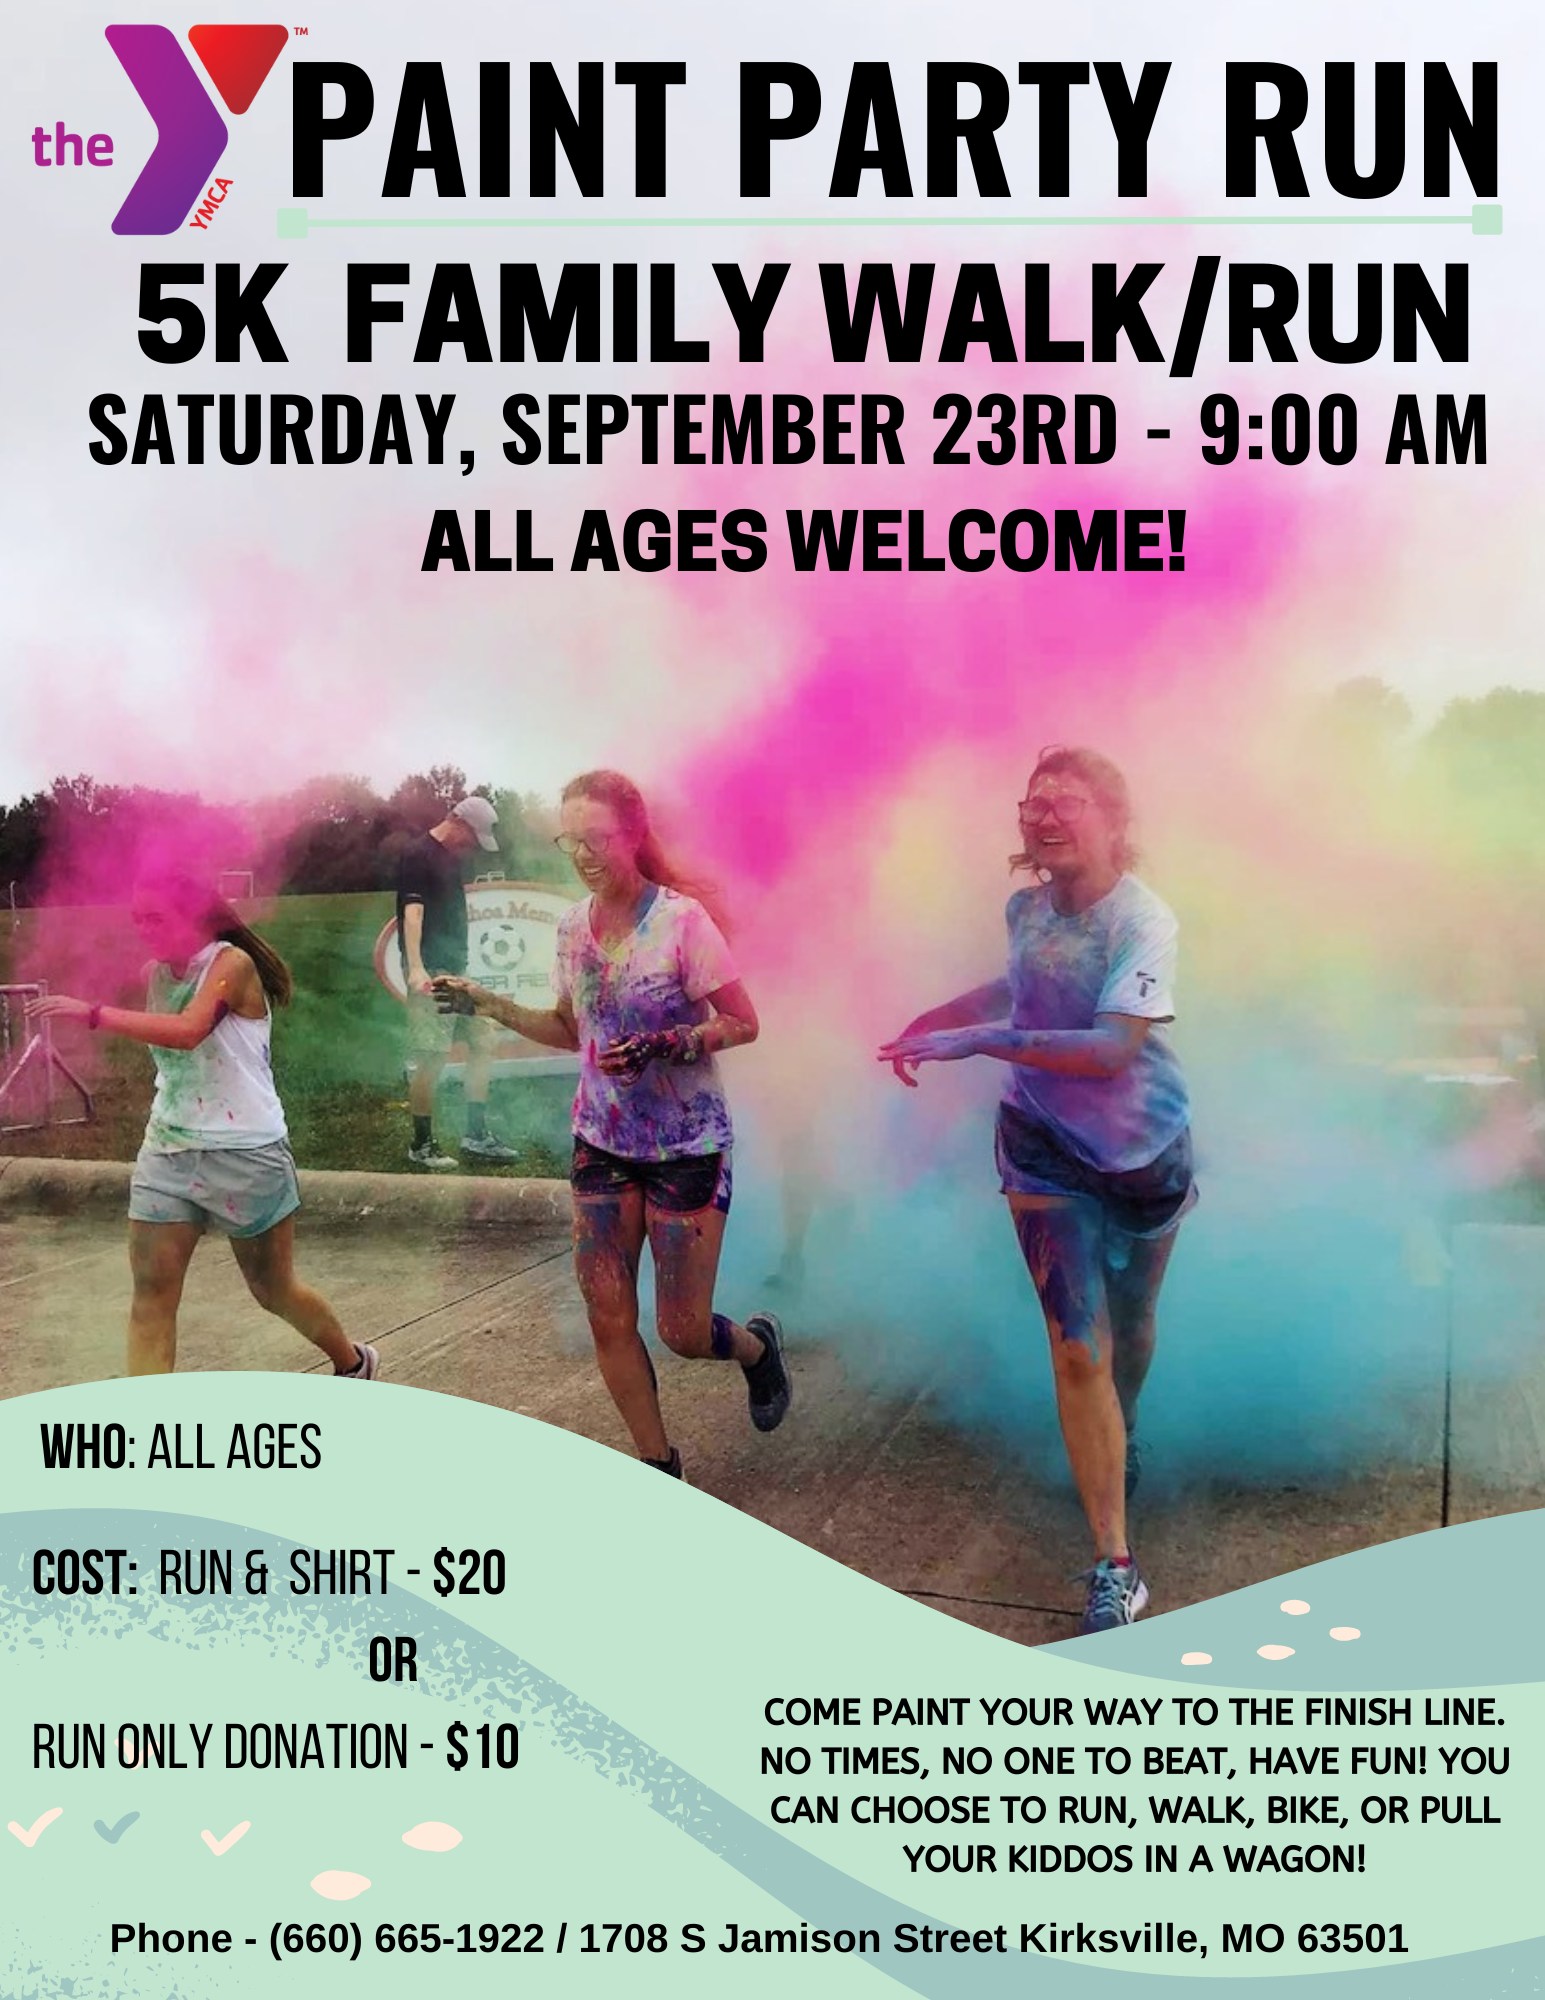 Check more about Adair County YMCA Paint Party Run